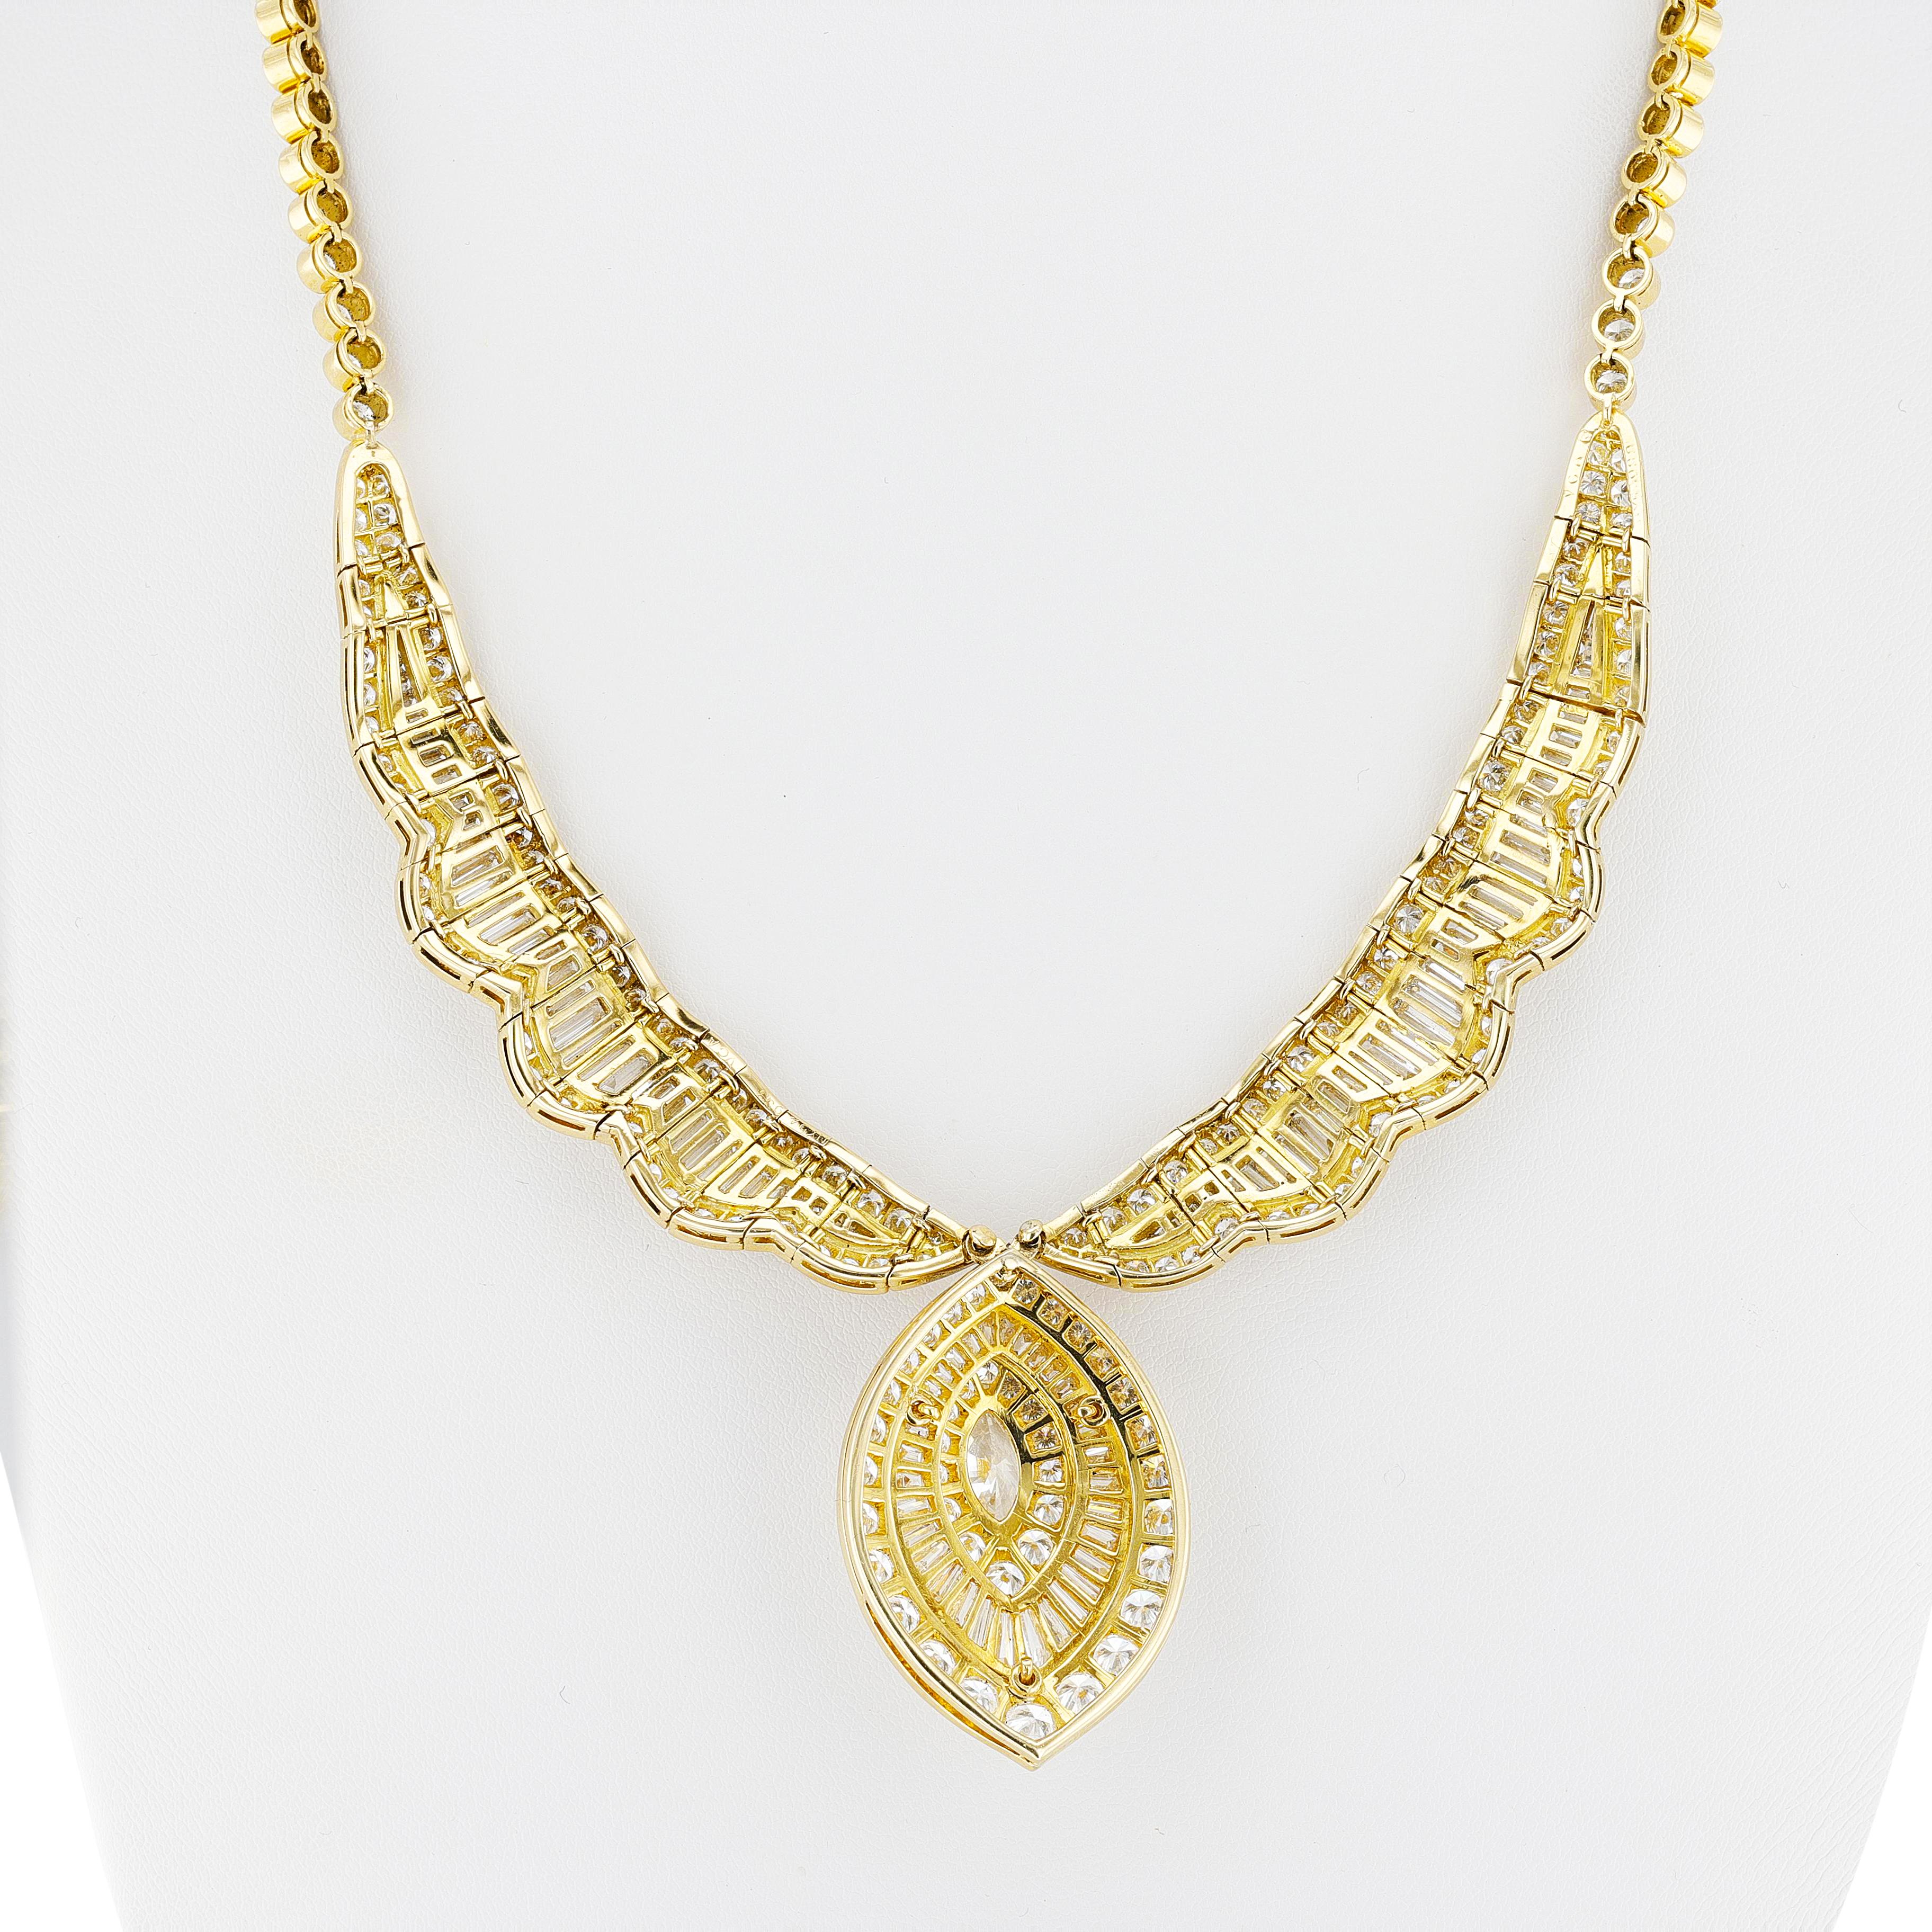 French Van Cleef & Arpels Marquise Center Diamond Necklace In Excellent Condition For Sale In New York, NY